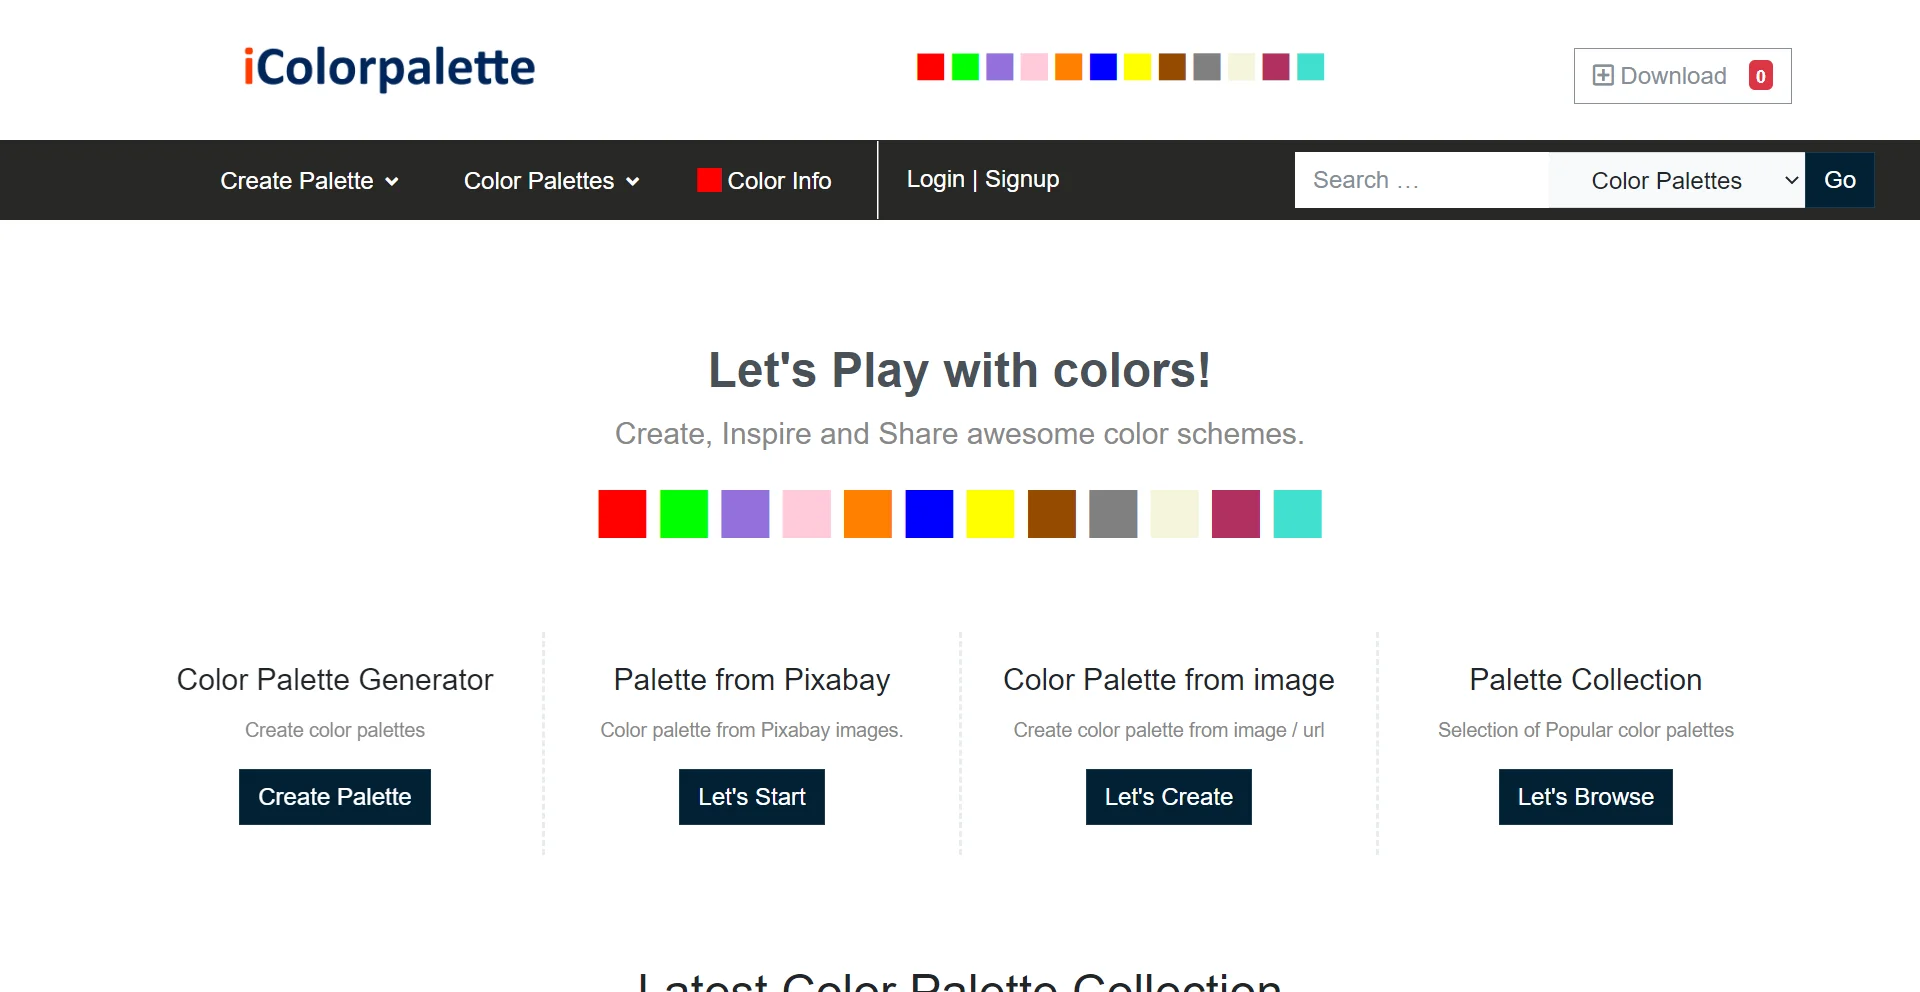 iColorpalette